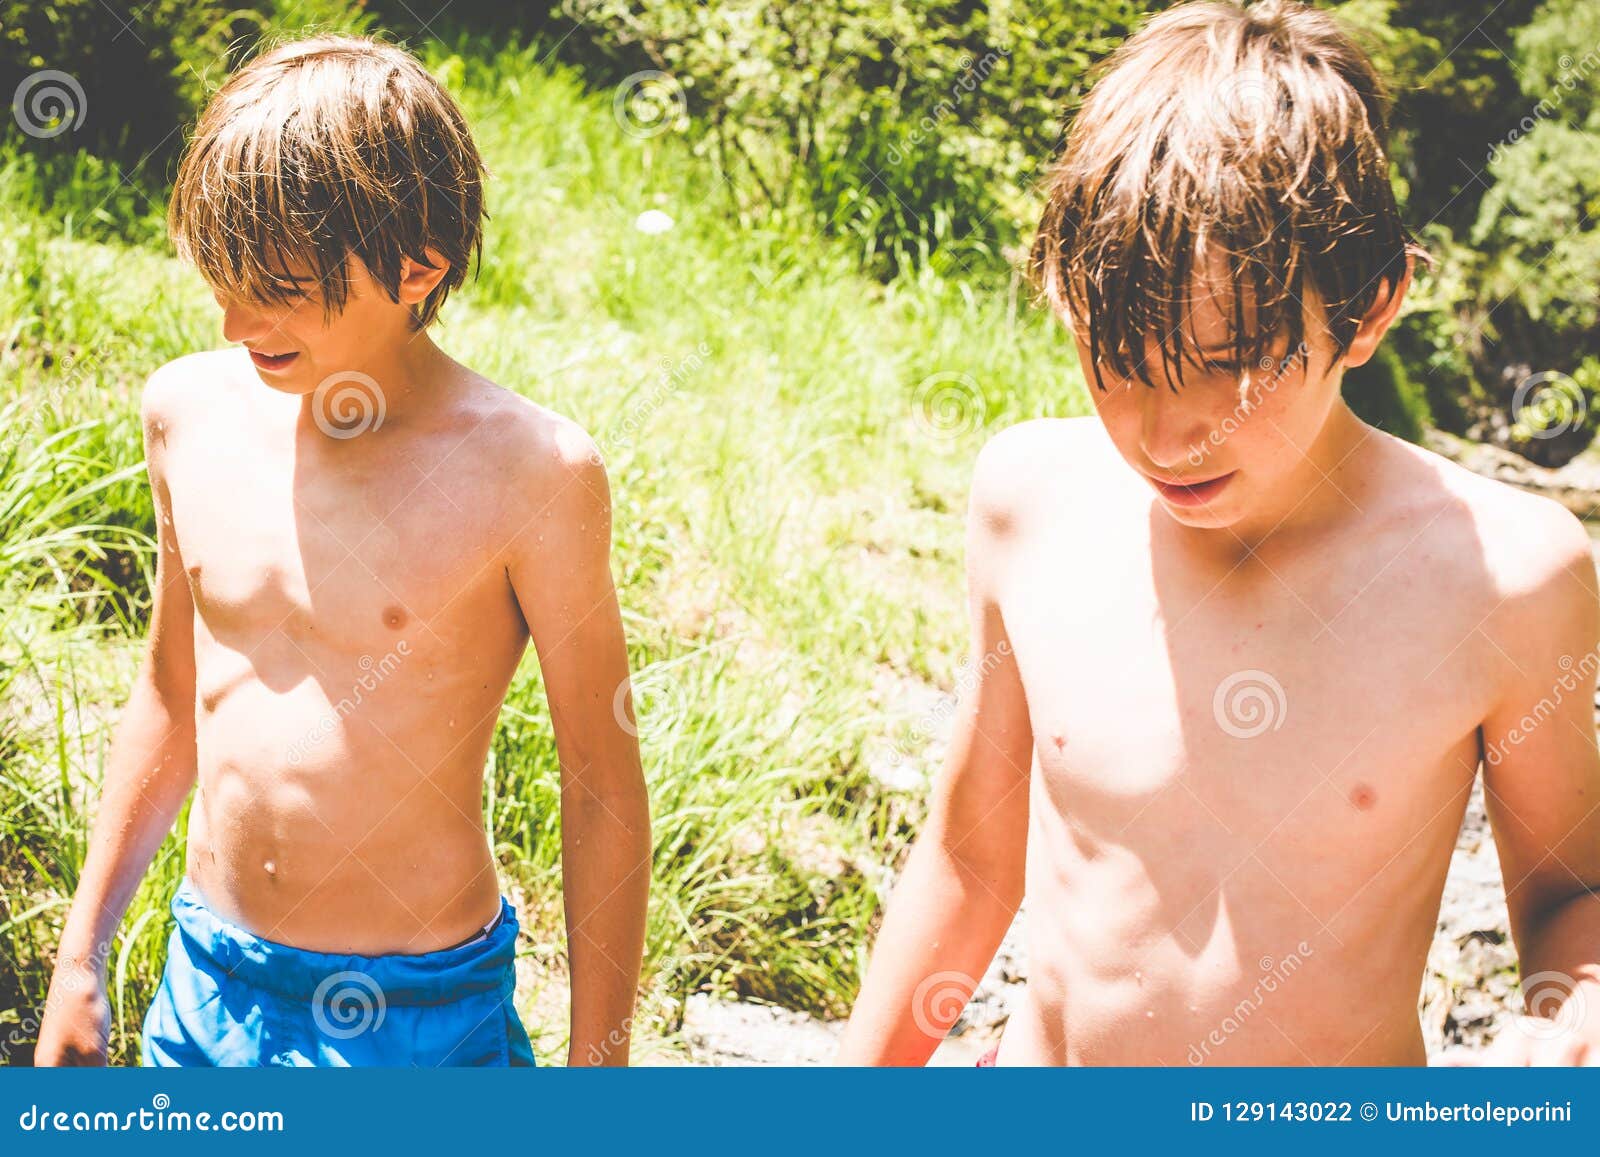 Young Boys Have Fun At The Small River Stock Photo I